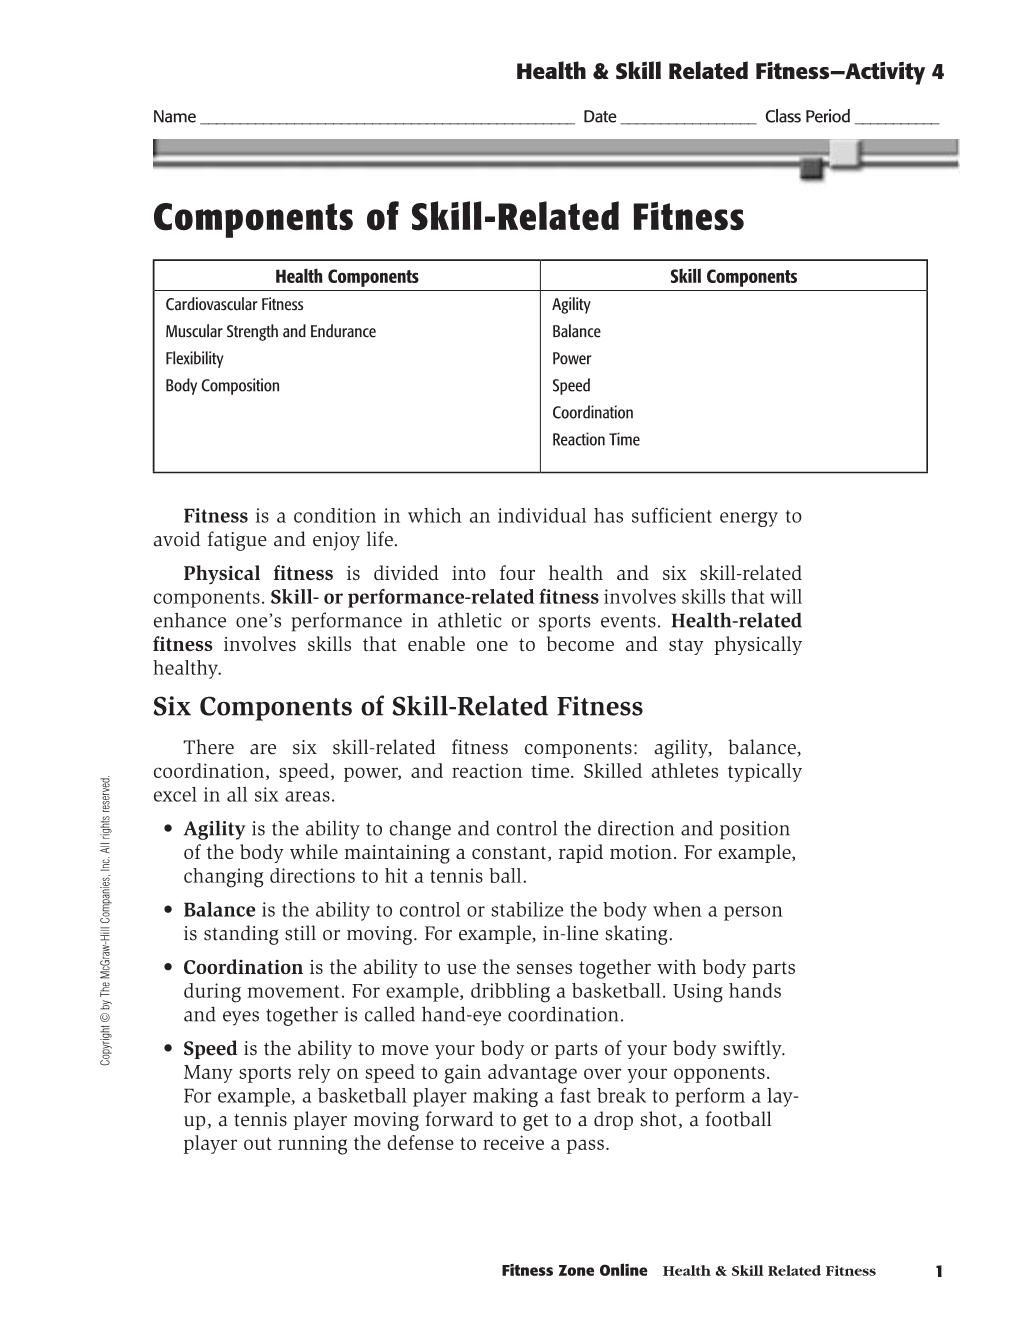 Components of Skill-Related Fitness